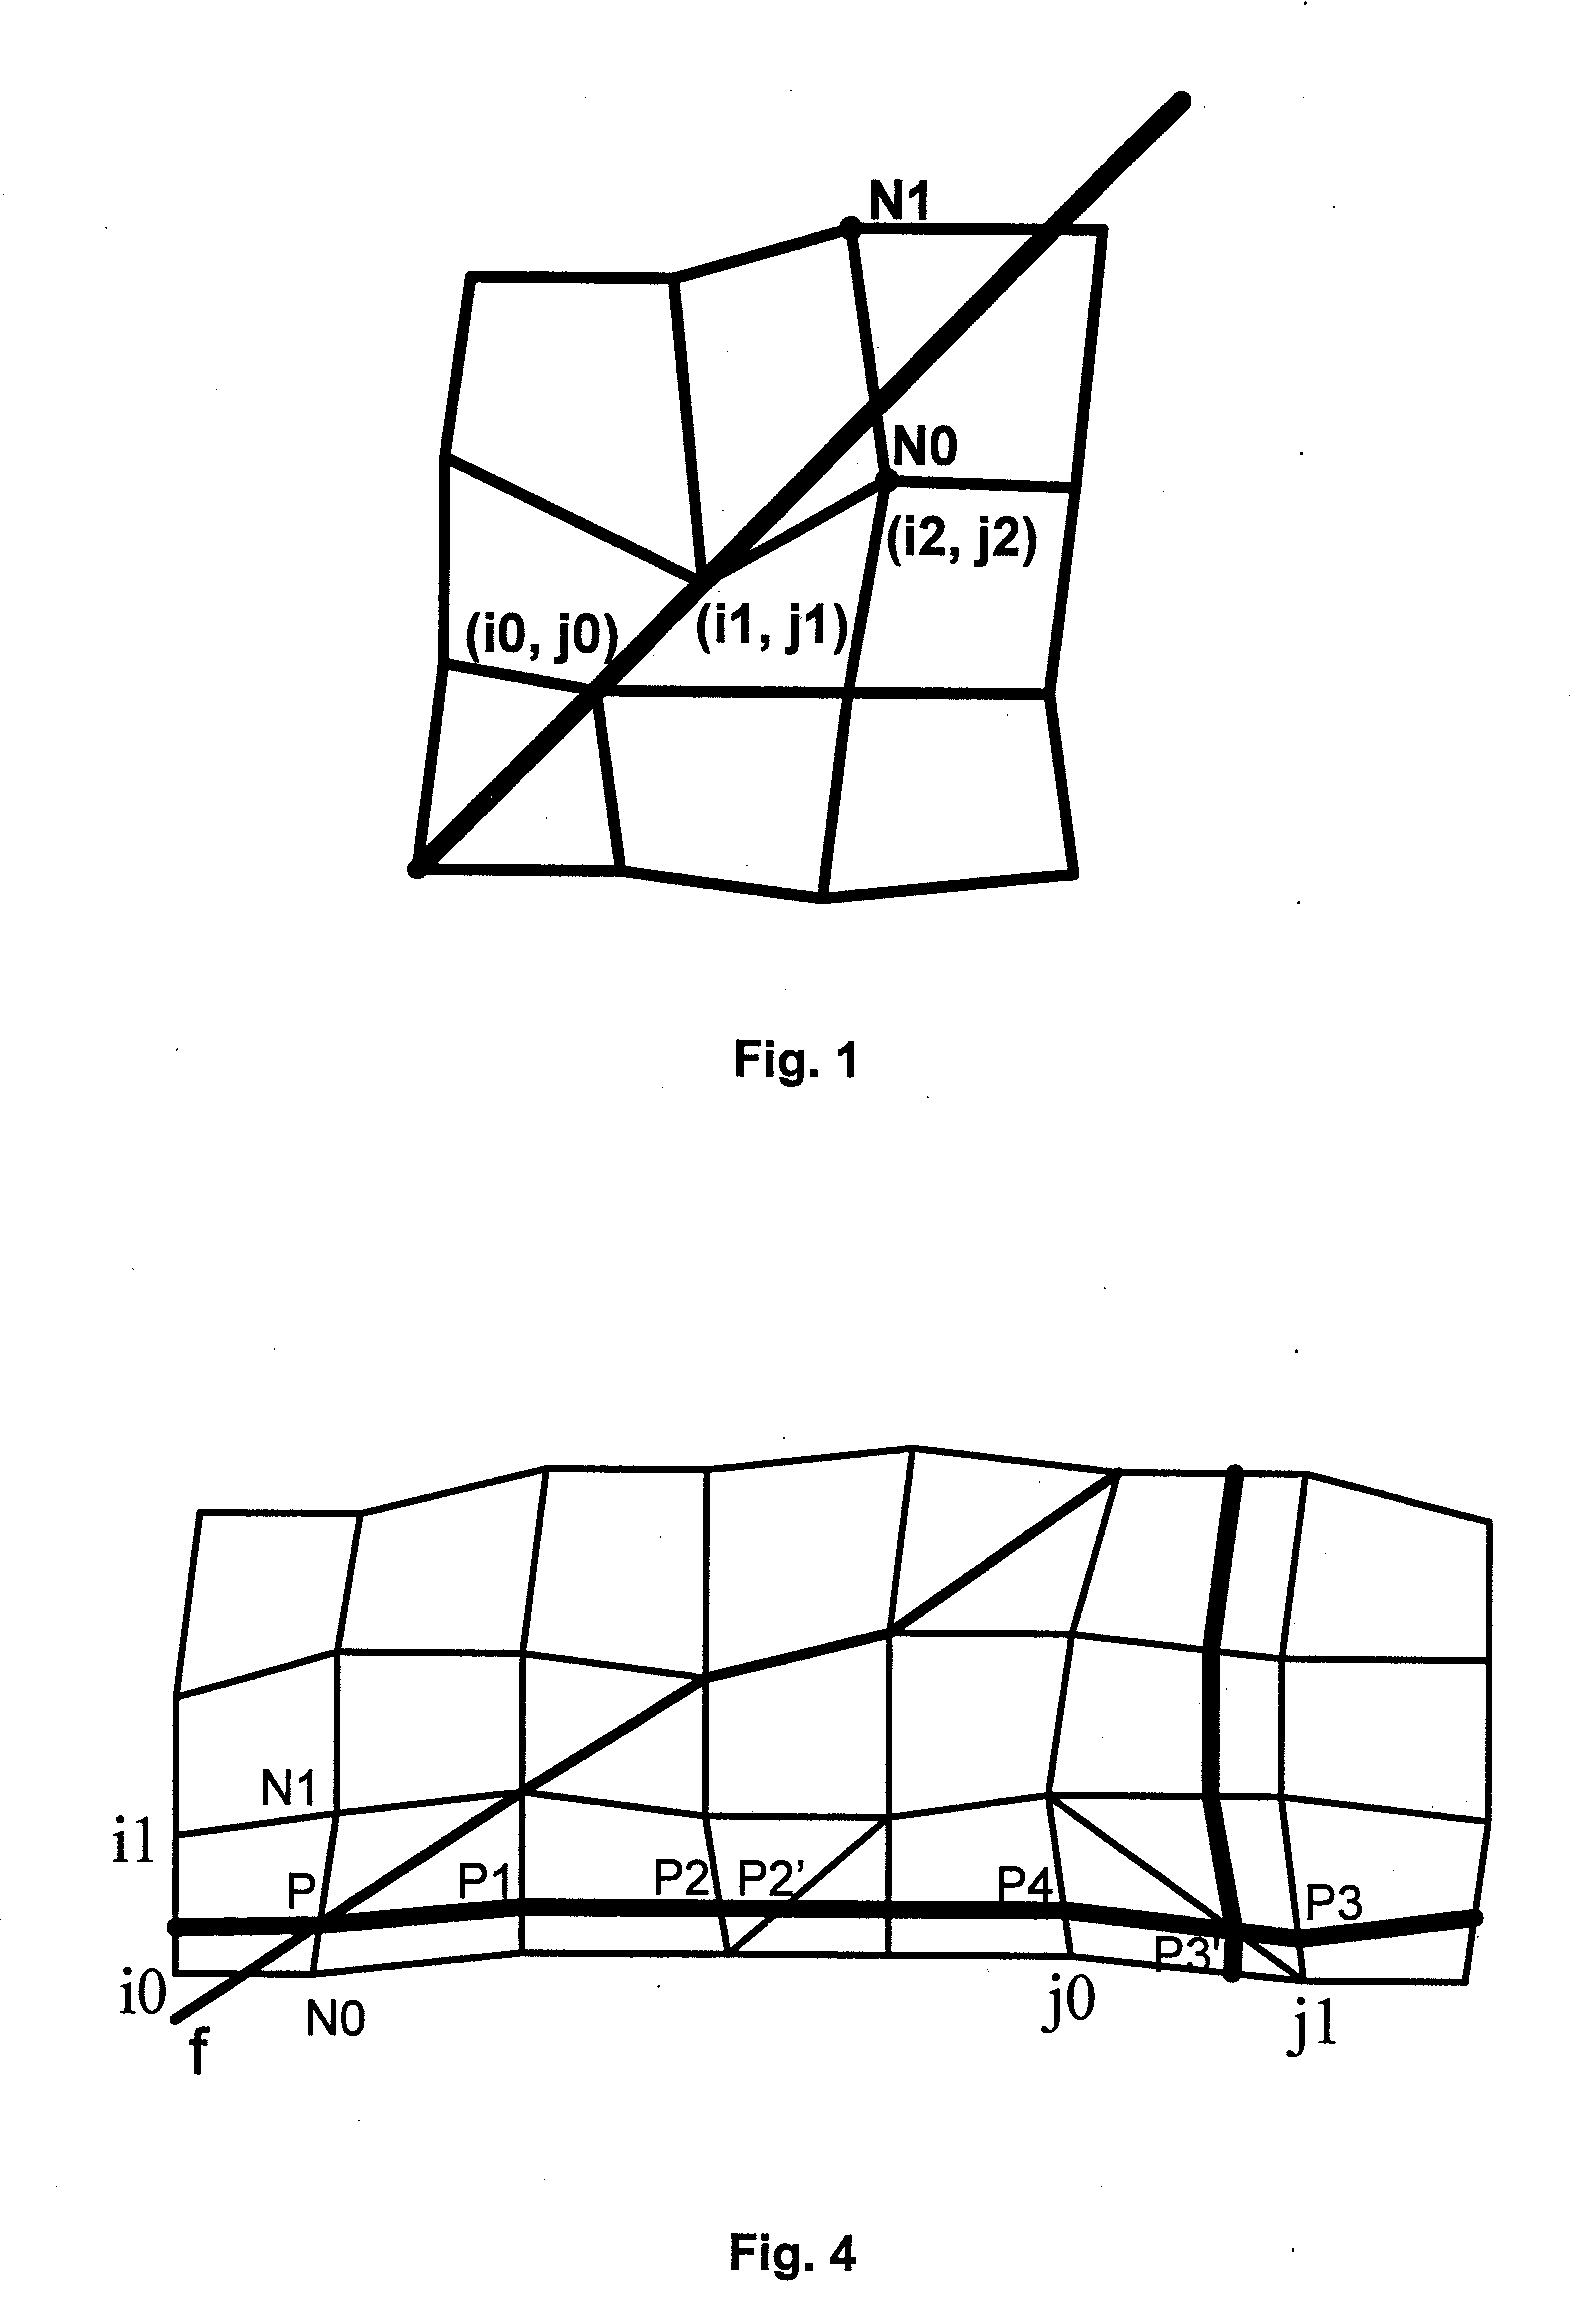 Method of generating a hex-dominant mesh of a faulted underground medium